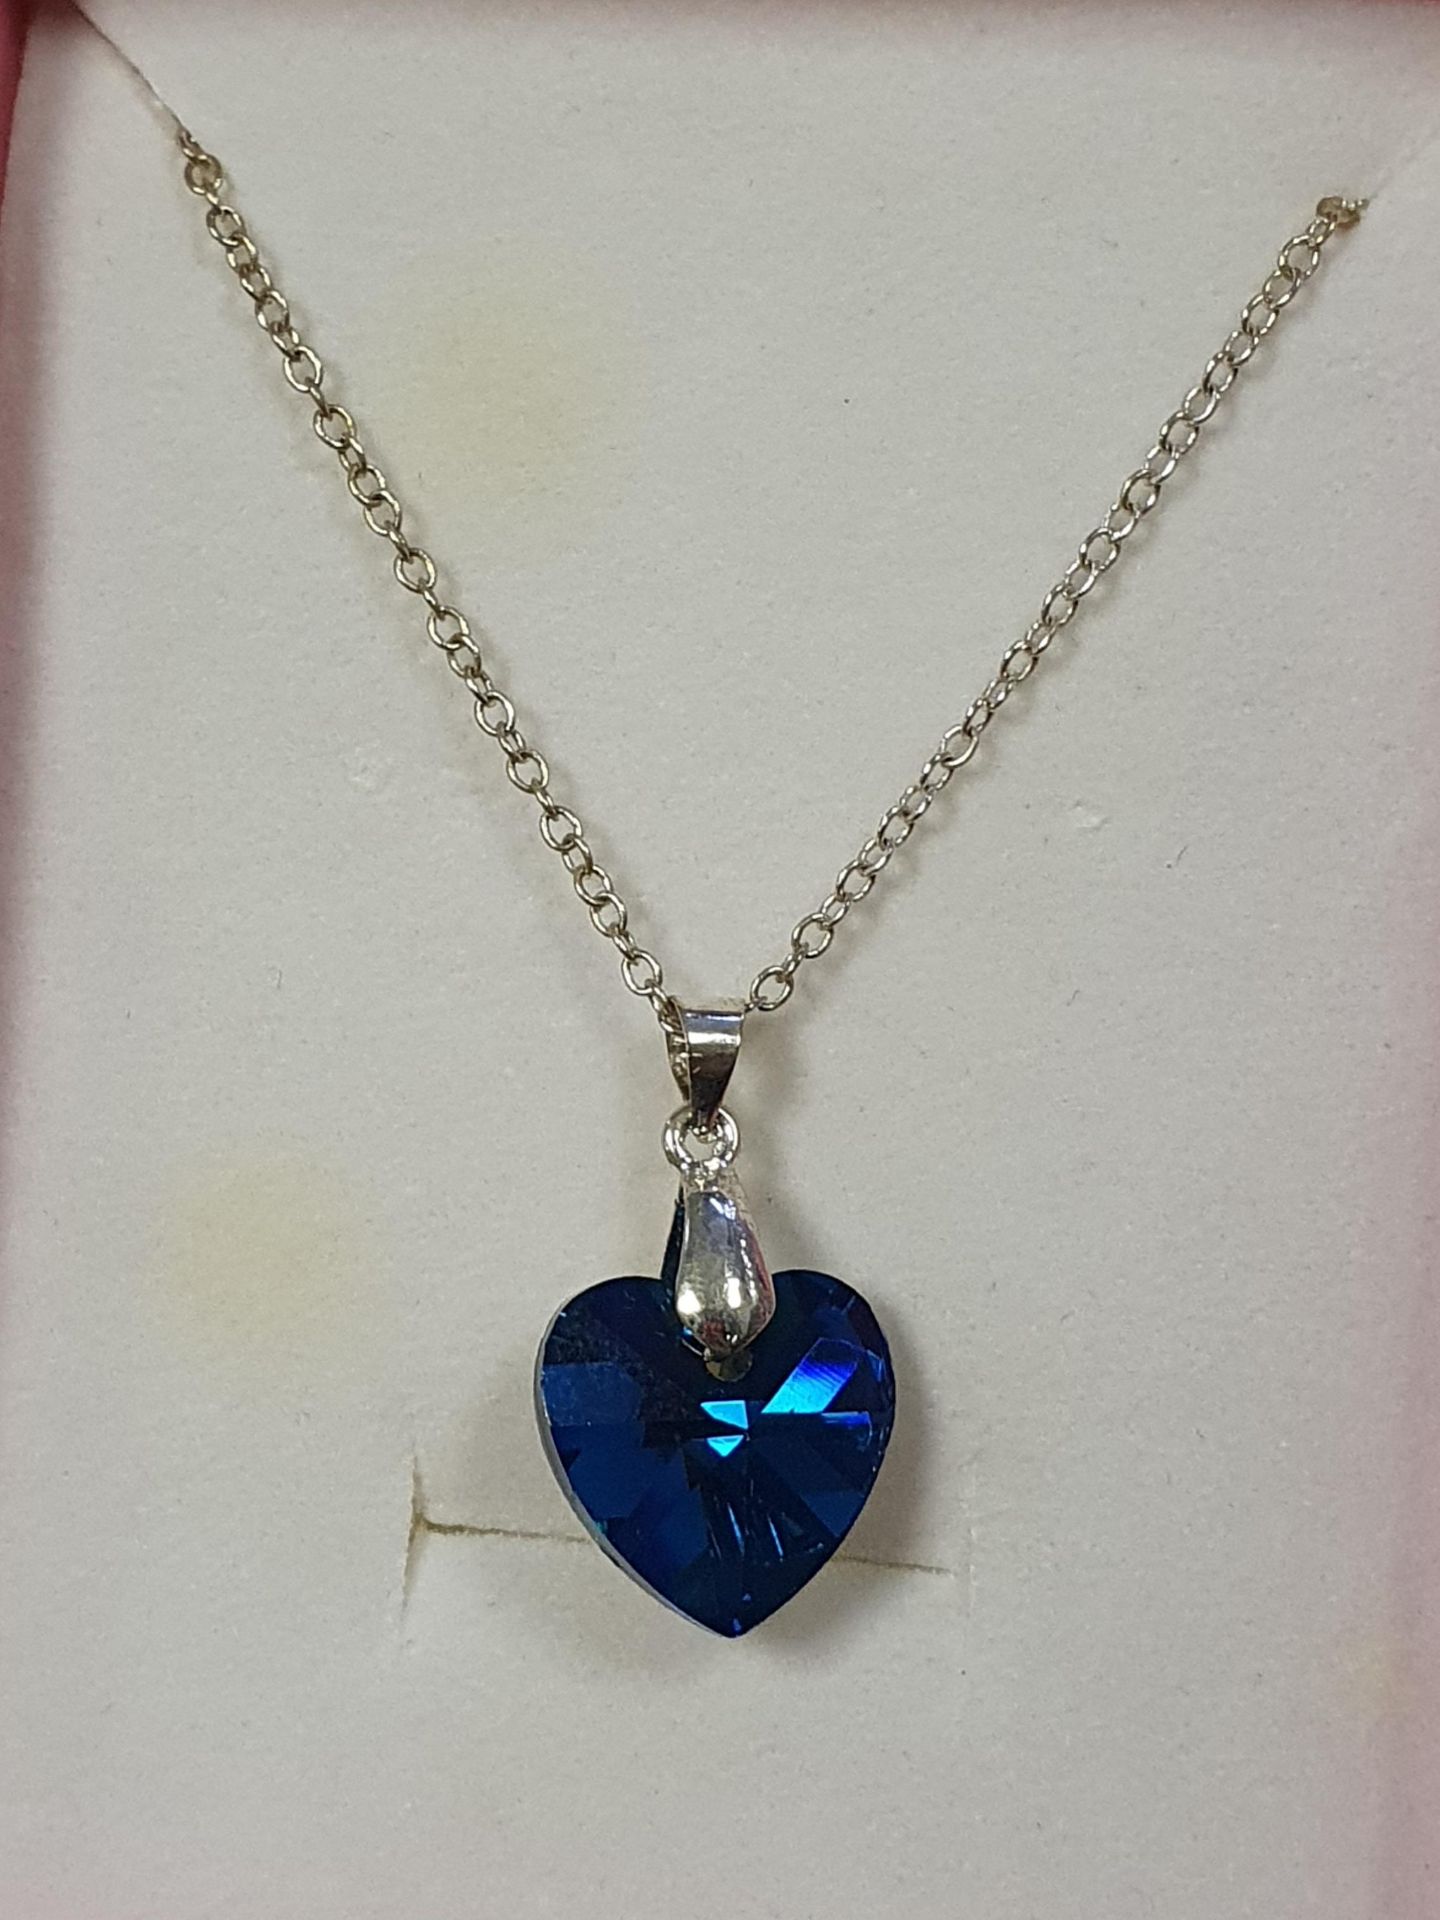 Blue heart 925 sterling silver pendant on chain